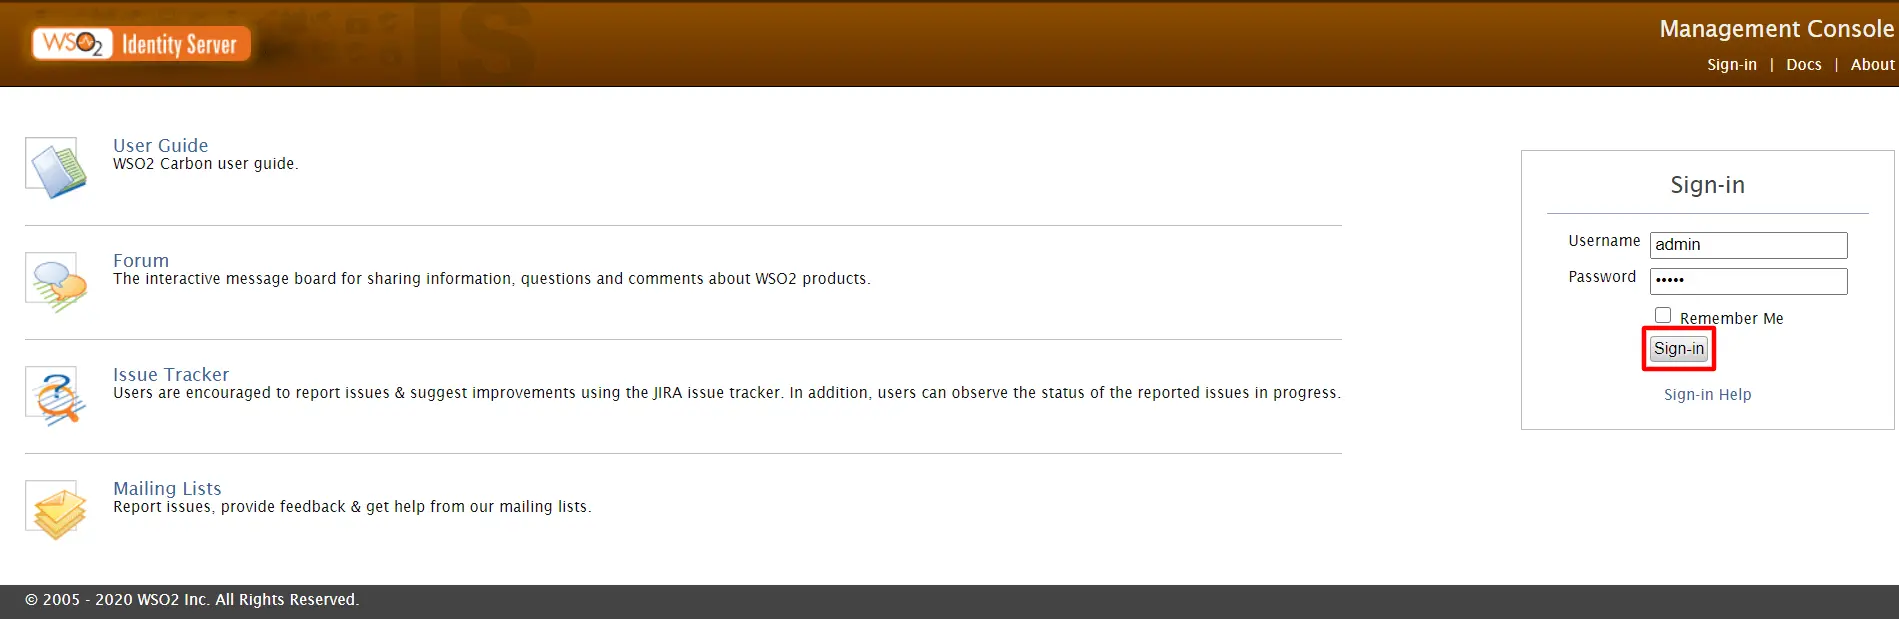 WSO2 single sign-on management console